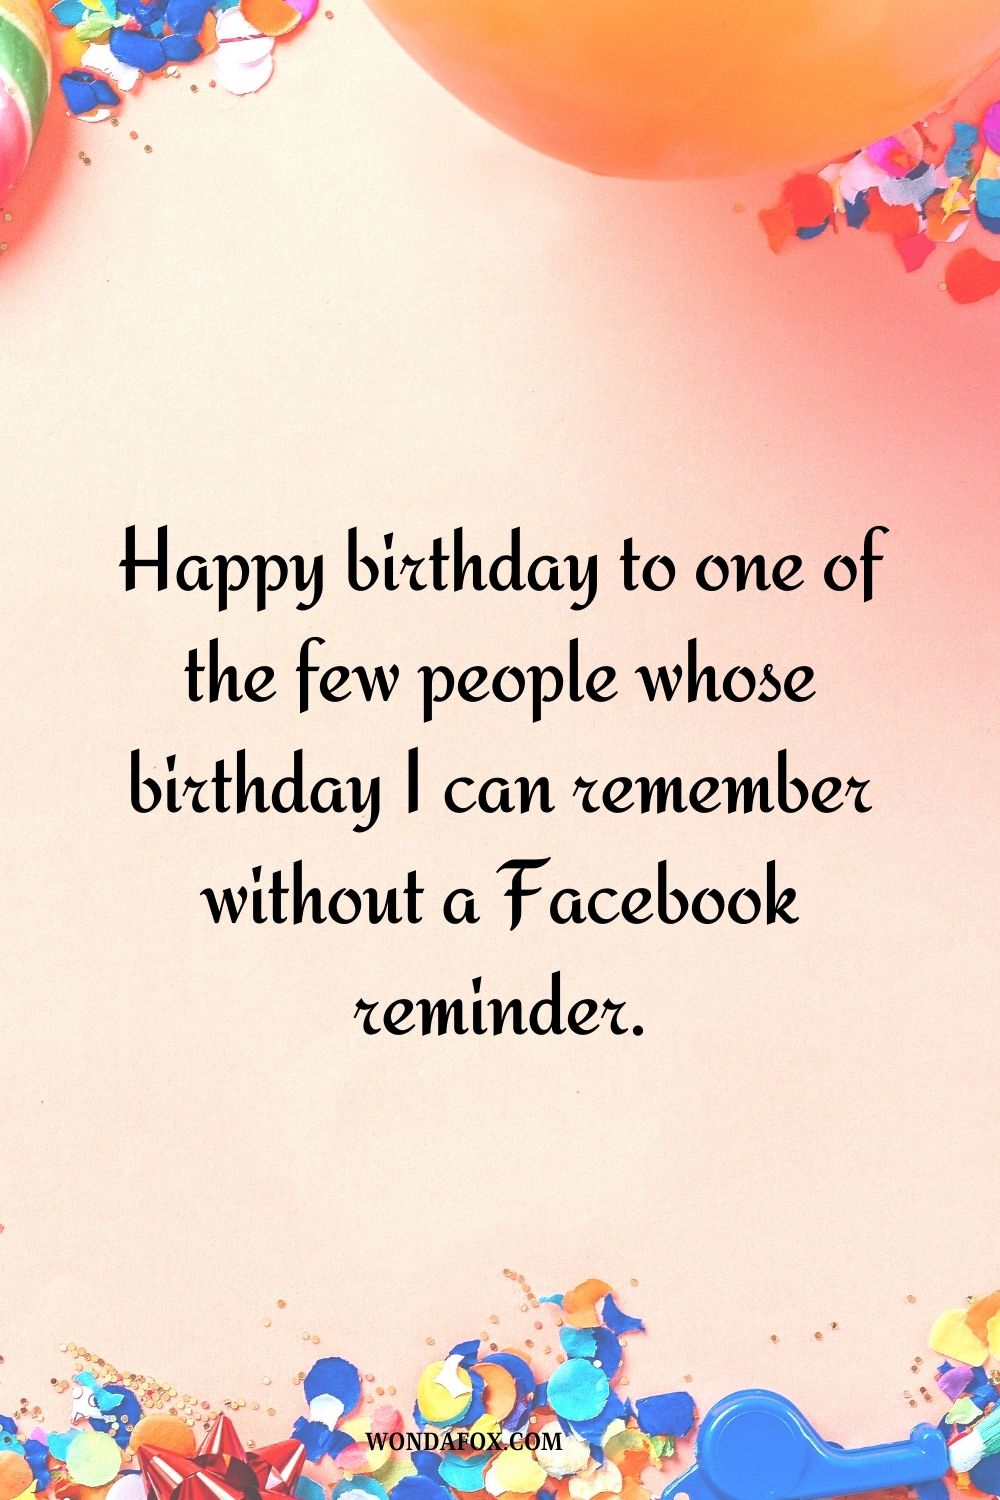 “Happy birthday to one of the few people whose birthday I can remember without a Facebook reminder.”